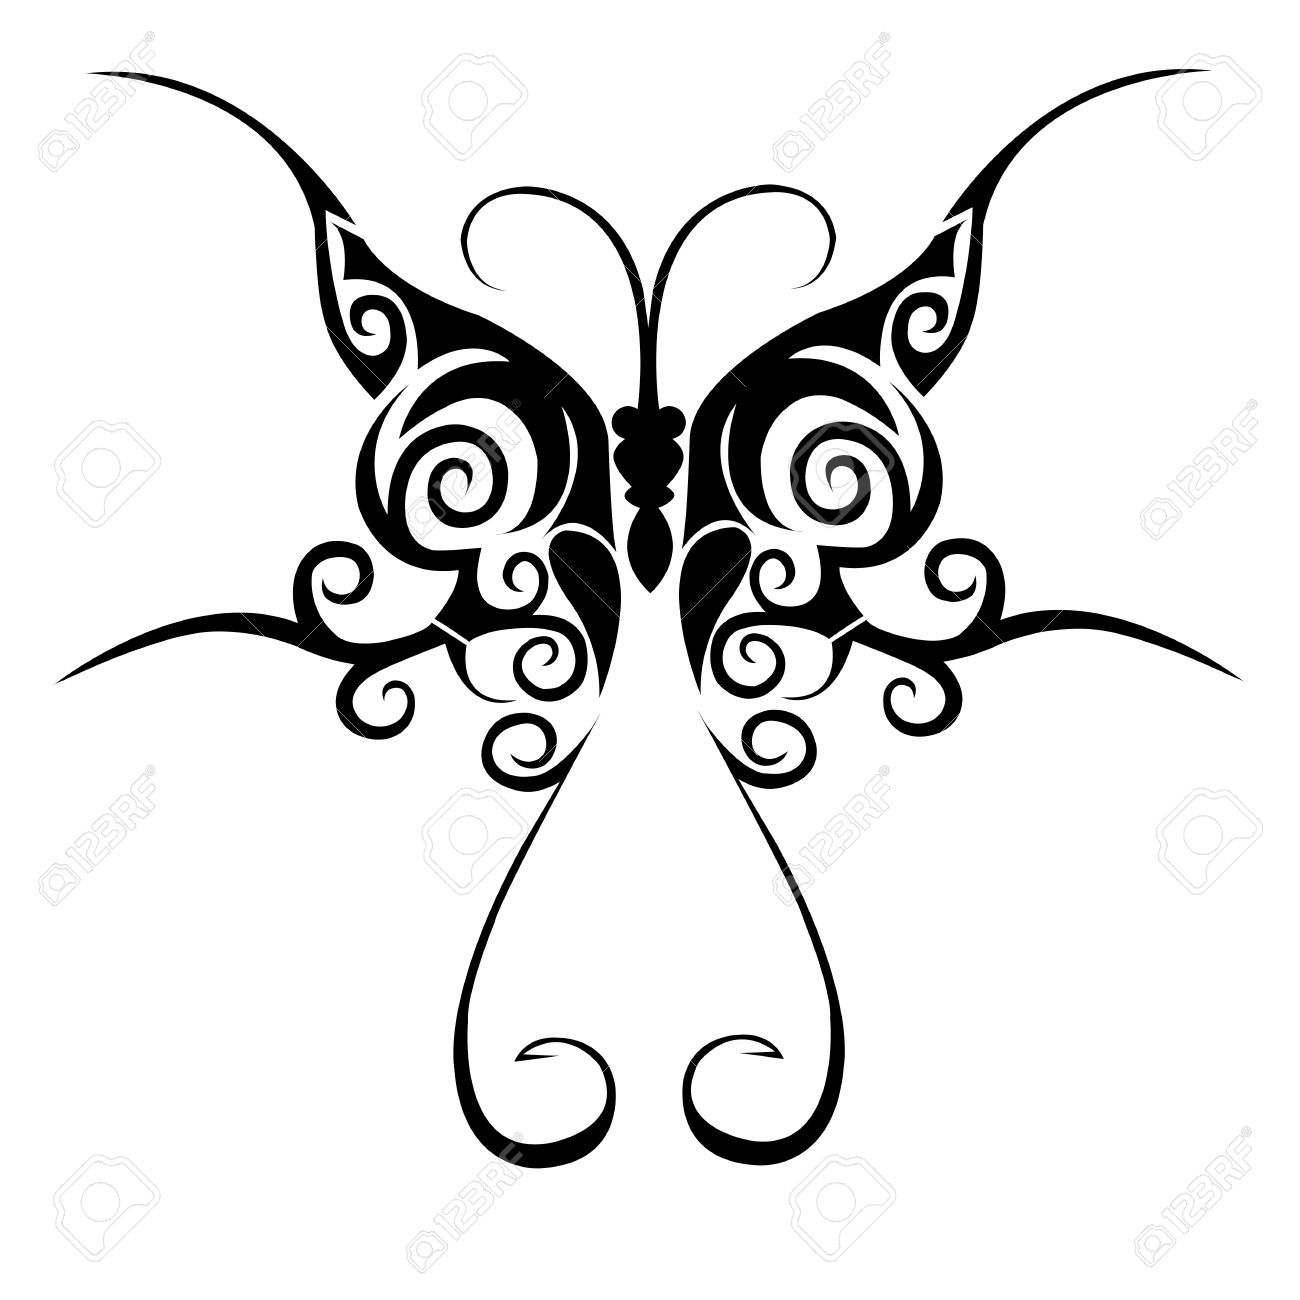 Tribal Butterfly Tattoo Royalty Free Cliparts Vectors And Stock for size 1300 X 1300